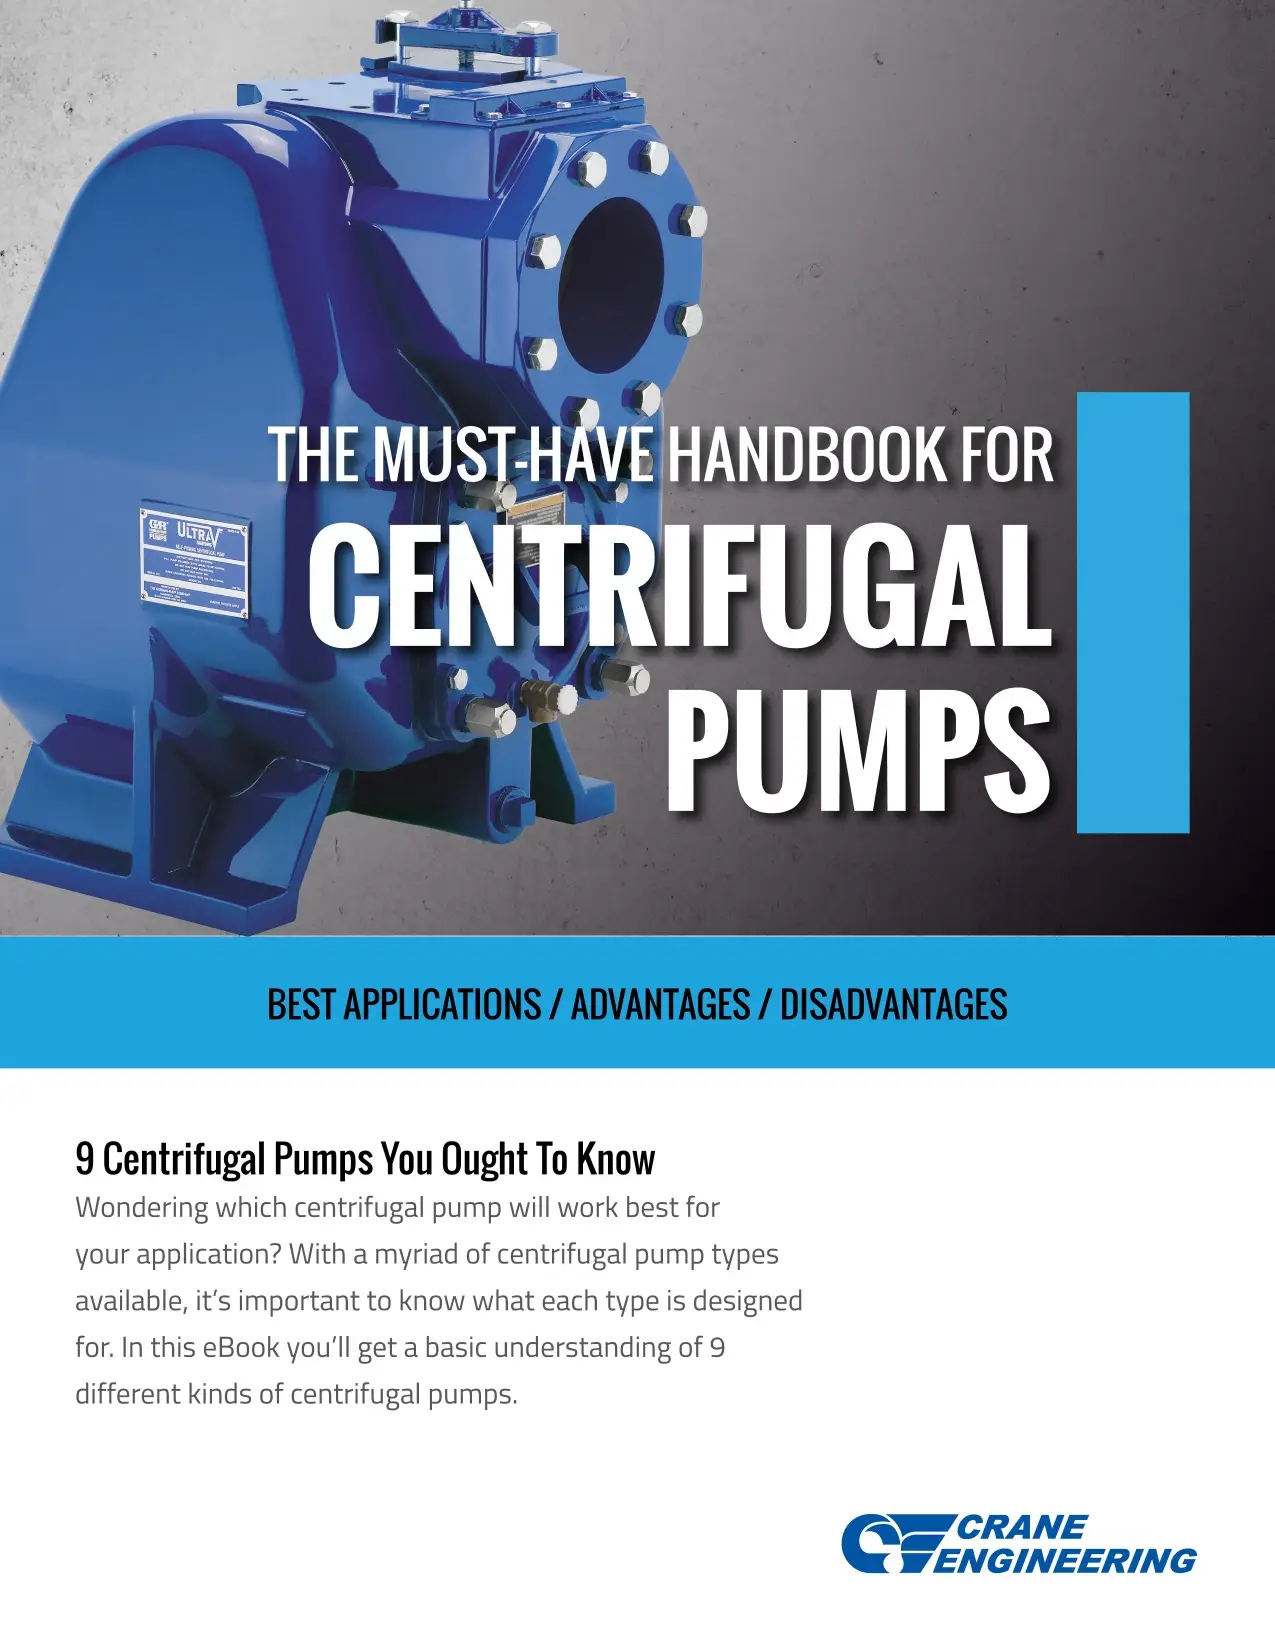 The Must-Have Handbook for Centrifugal Pumps